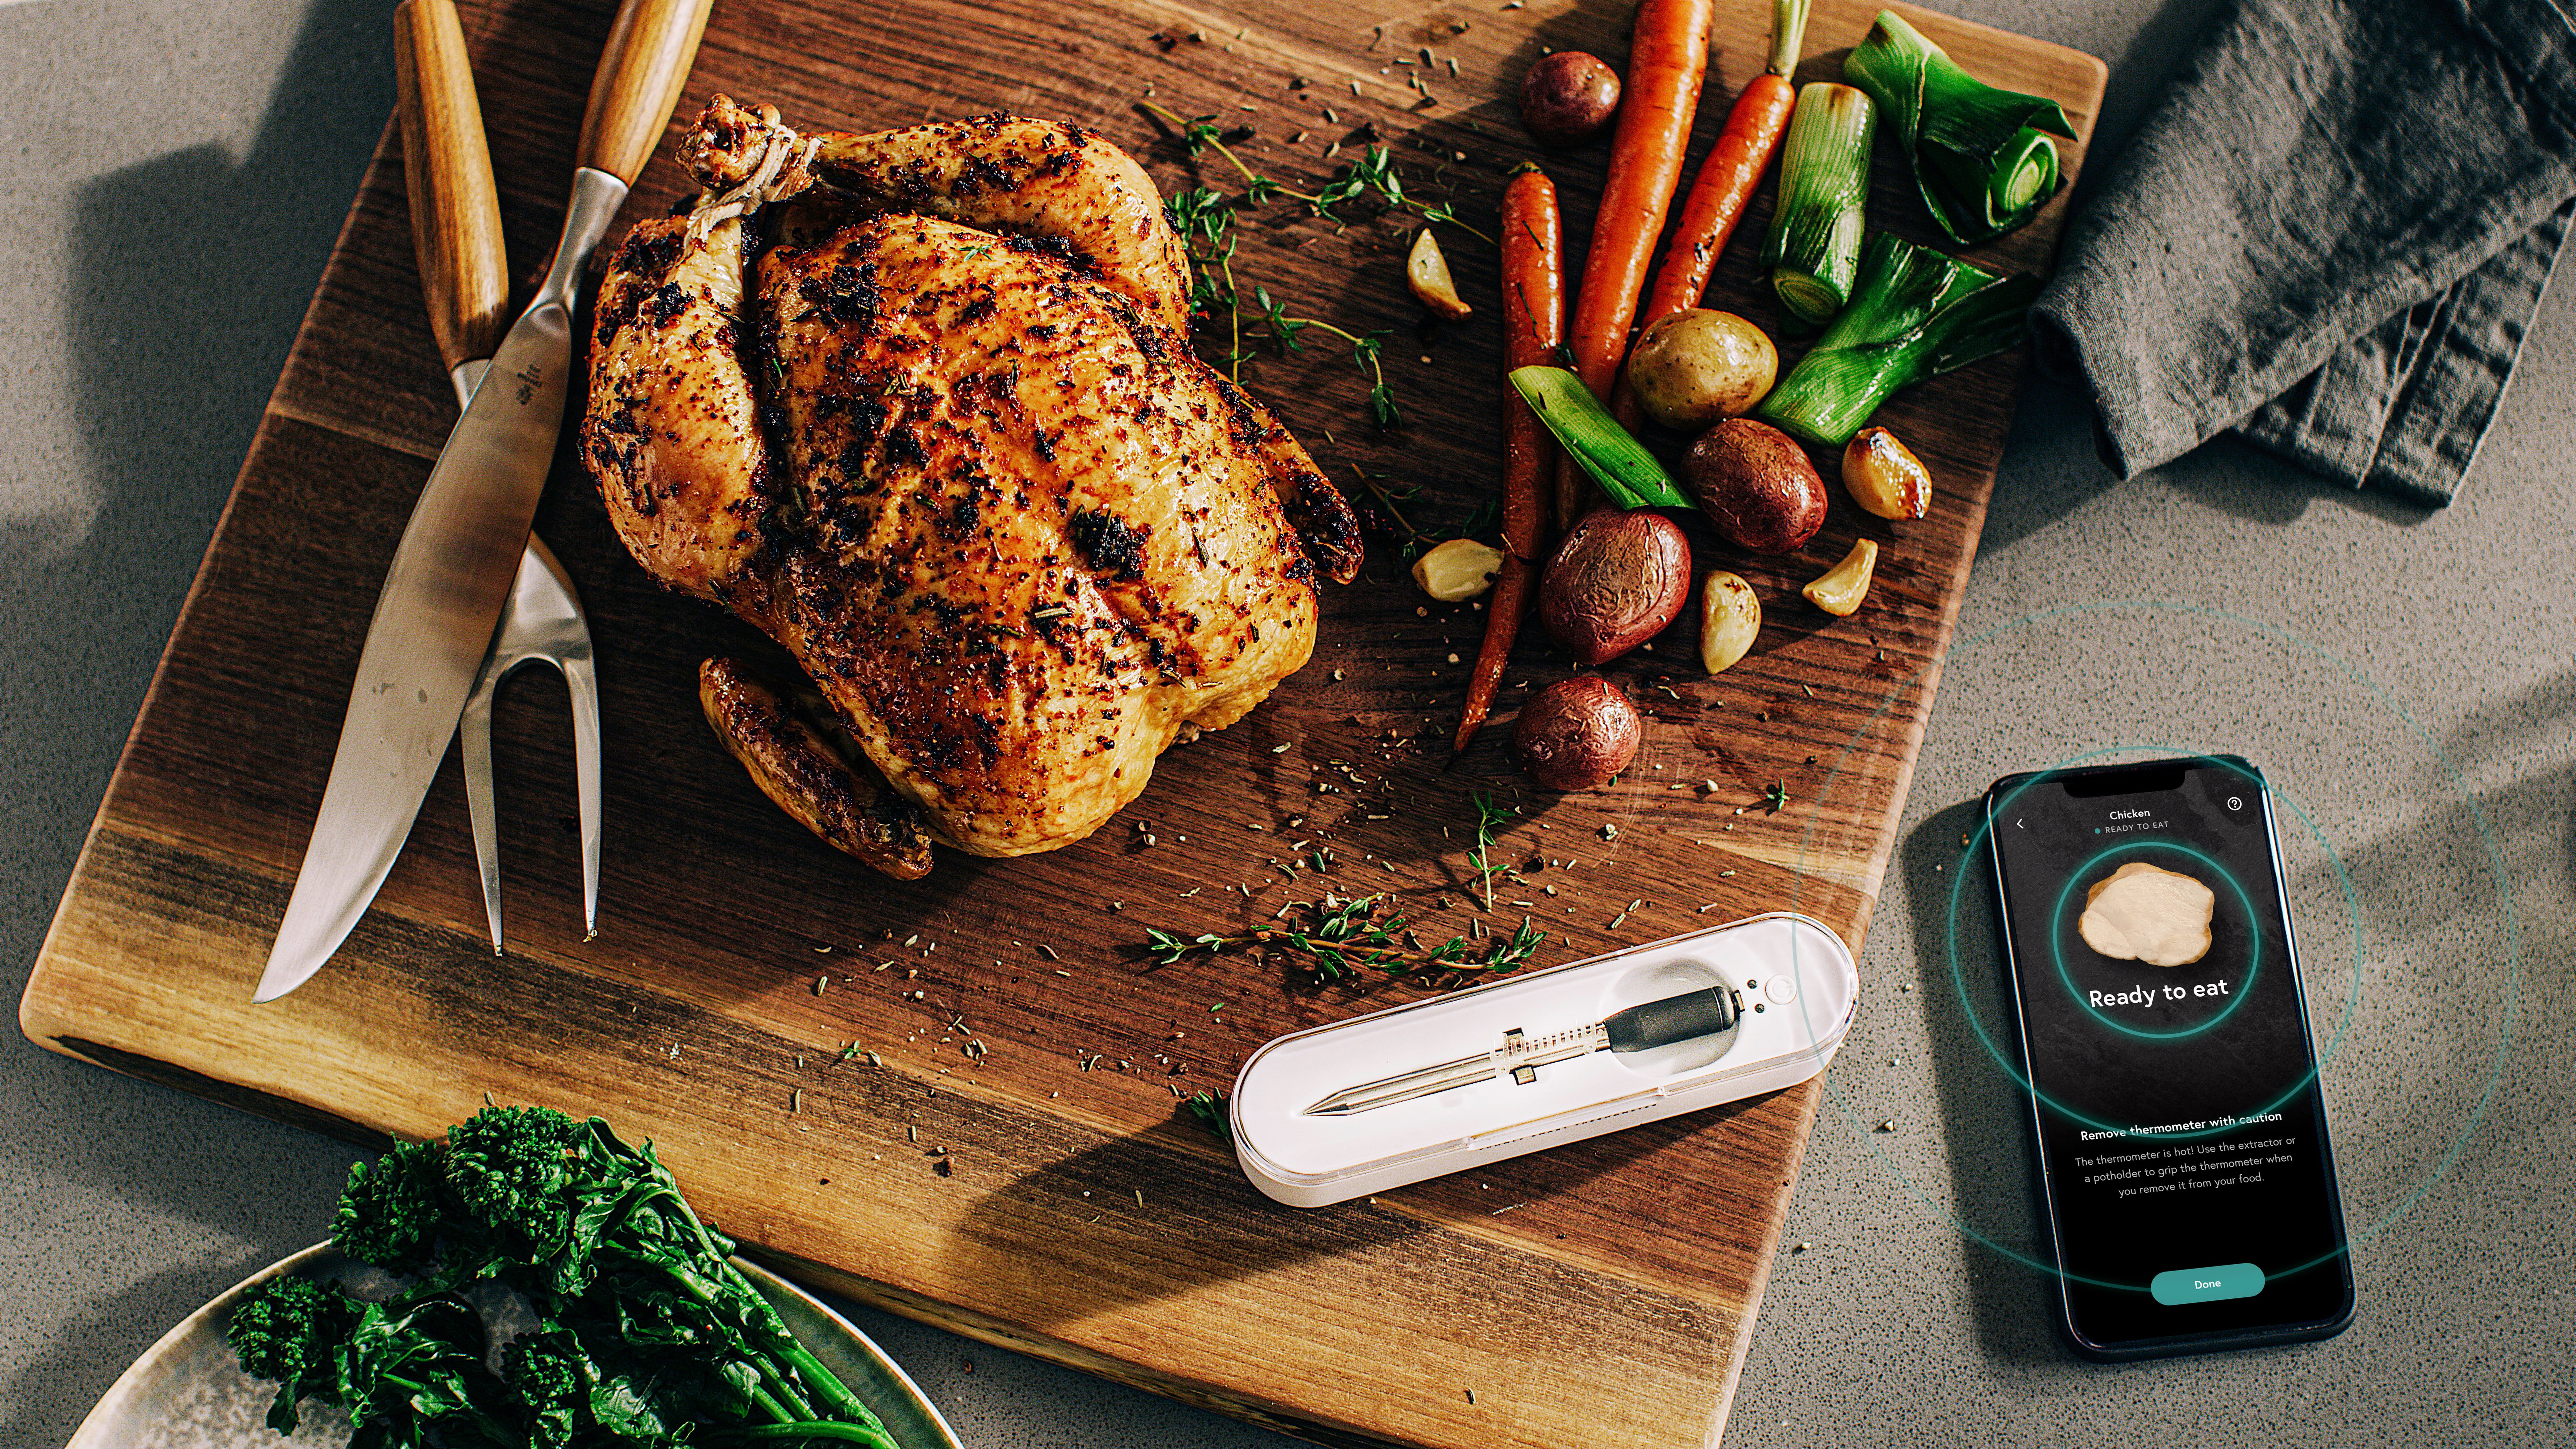 Yummly Digital Probe Bluetooth Compatibility Meat Thermometer in